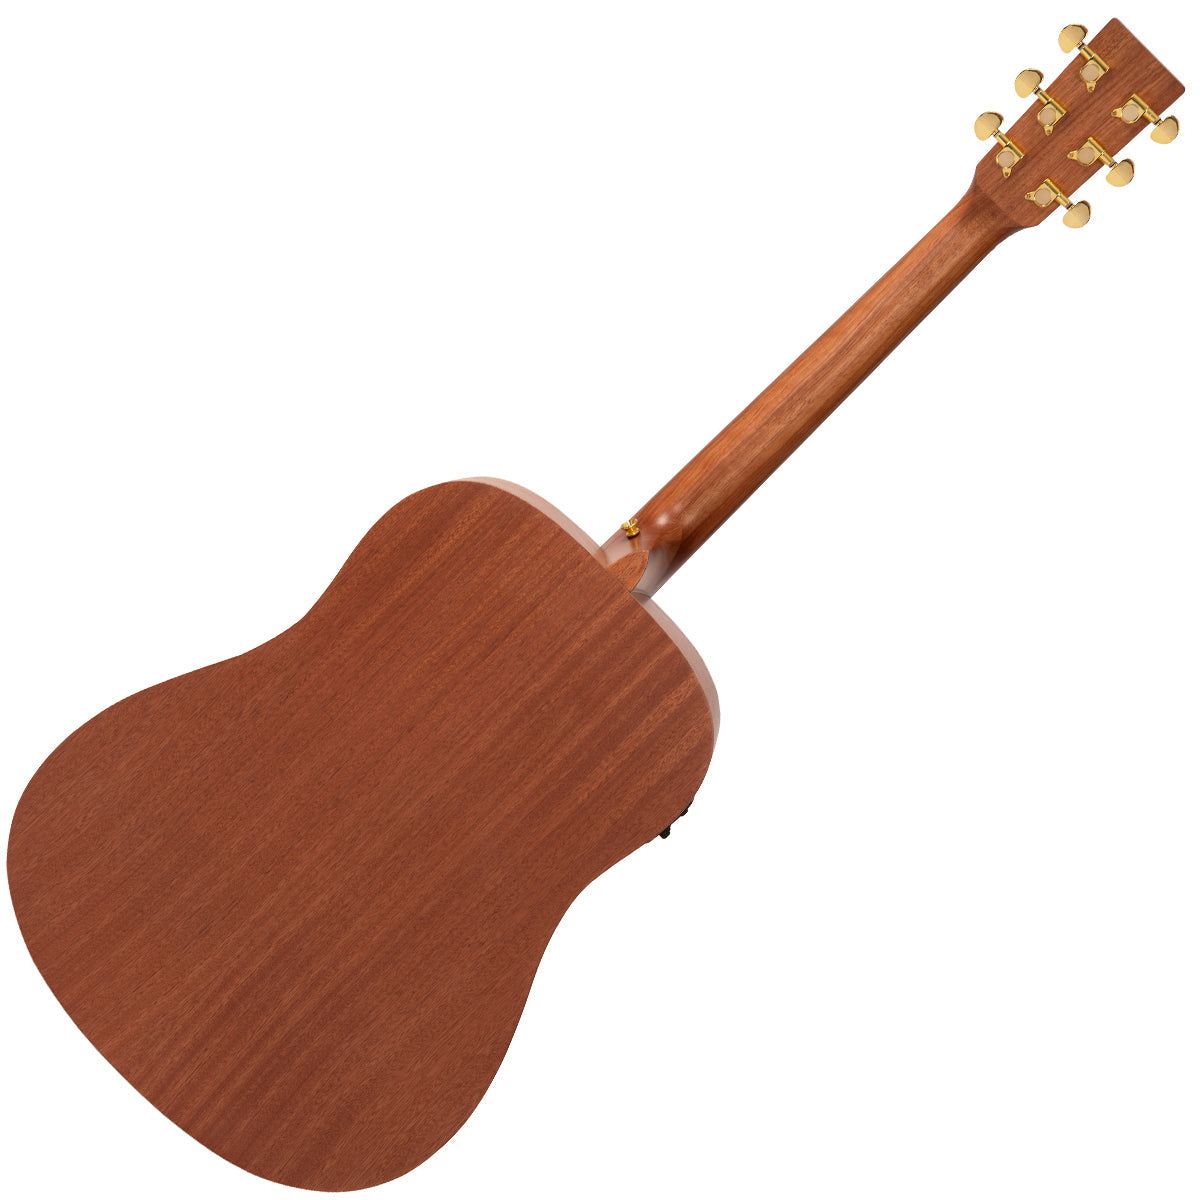 Vintage Mahogany Series 'Dreadnought' Electro-Acoustic Guitar ~ Satin Mahogany, Electric Acoustic Guitars for sale at Richards Guitars.